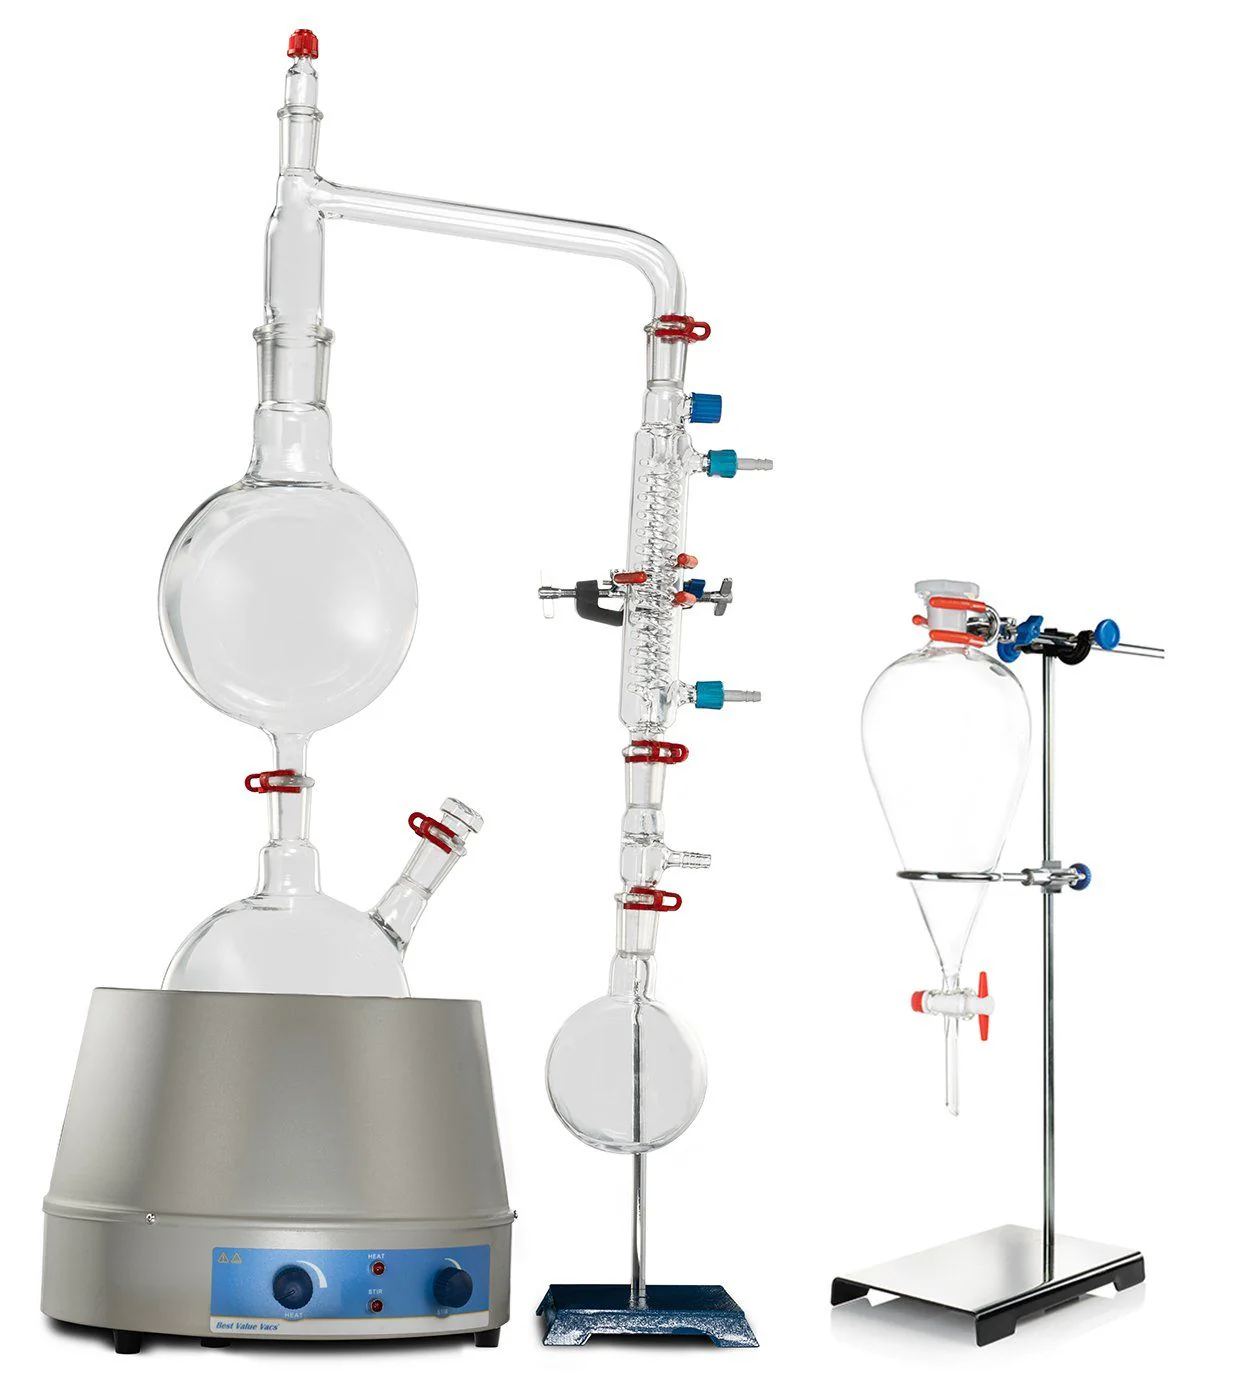 Steam Distillation Kit Questions & Answers